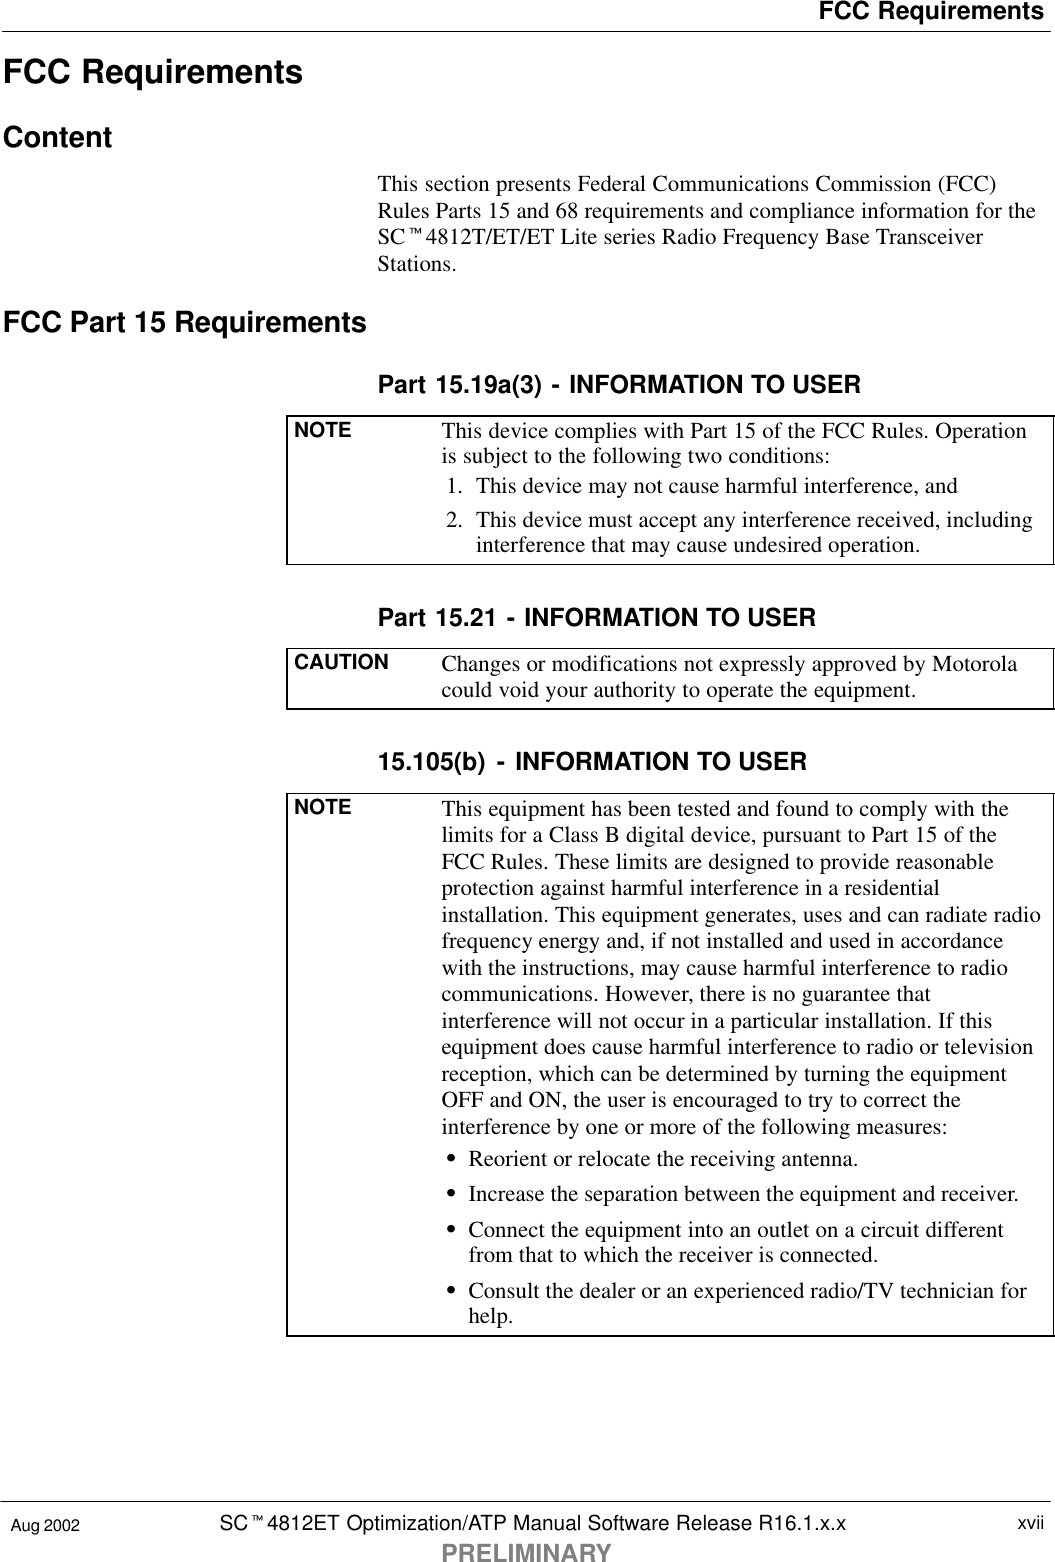 FCC RequirementsSCt4812ET Optimization/ATP Manual Software Release R16.1.x.xPRELIMINARYxviiAug 2002FCC RequirementsContentThis section presents Federal Communications Commission (FCC)Rules Parts 15 and 68 requirements and compliance information for theSCt4812T/ET/ET Lite series Radio Frequency Base TransceiverStations.FCC Part 15 RequirementsPart 15.19a(3) - INFORMATION TO USERNOTE This device complies with Part 15 of the FCC Rules. Operationis subject to the following two conditions:1. This device may not cause harmful interference, and2. This device must accept any interference received, includinginterference that may cause undesired operation.Part 15.21 - INFORMATION TO USERCAUTION Changes or modifications not expressly approved by Motorolacould void your authority to operate the equipment.15.105(b) - INFORMATION TO USERNOTE This equipment has been tested and found to comply with thelimits for a Class B digital device, pursuant to Part 15 of theFCC Rules. These limits are designed to provide reasonableprotection against harmful interference in a residentialinstallation. This equipment generates, uses and can radiate radiofrequency energy and, if not installed and used in accordancewith the instructions, may cause harmful interference to radiocommunications. However, there is no guarantee thatinterference will not occur in a particular installation. If thisequipment does cause harmful interference to radio or televisionreception, which can be determined by turning the equipmentOFF and ON, the user is encouraged to try to correct theinterference by one or more of the following measures:SReorient or relocate the receiving antenna.SIncrease the separation between the equipment and receiver.SConnect the equipment into an outlet on a circuit differentfrom that to which the receiver is connected.SConsult the dealer or an experienced radio/TV technician forhelp.